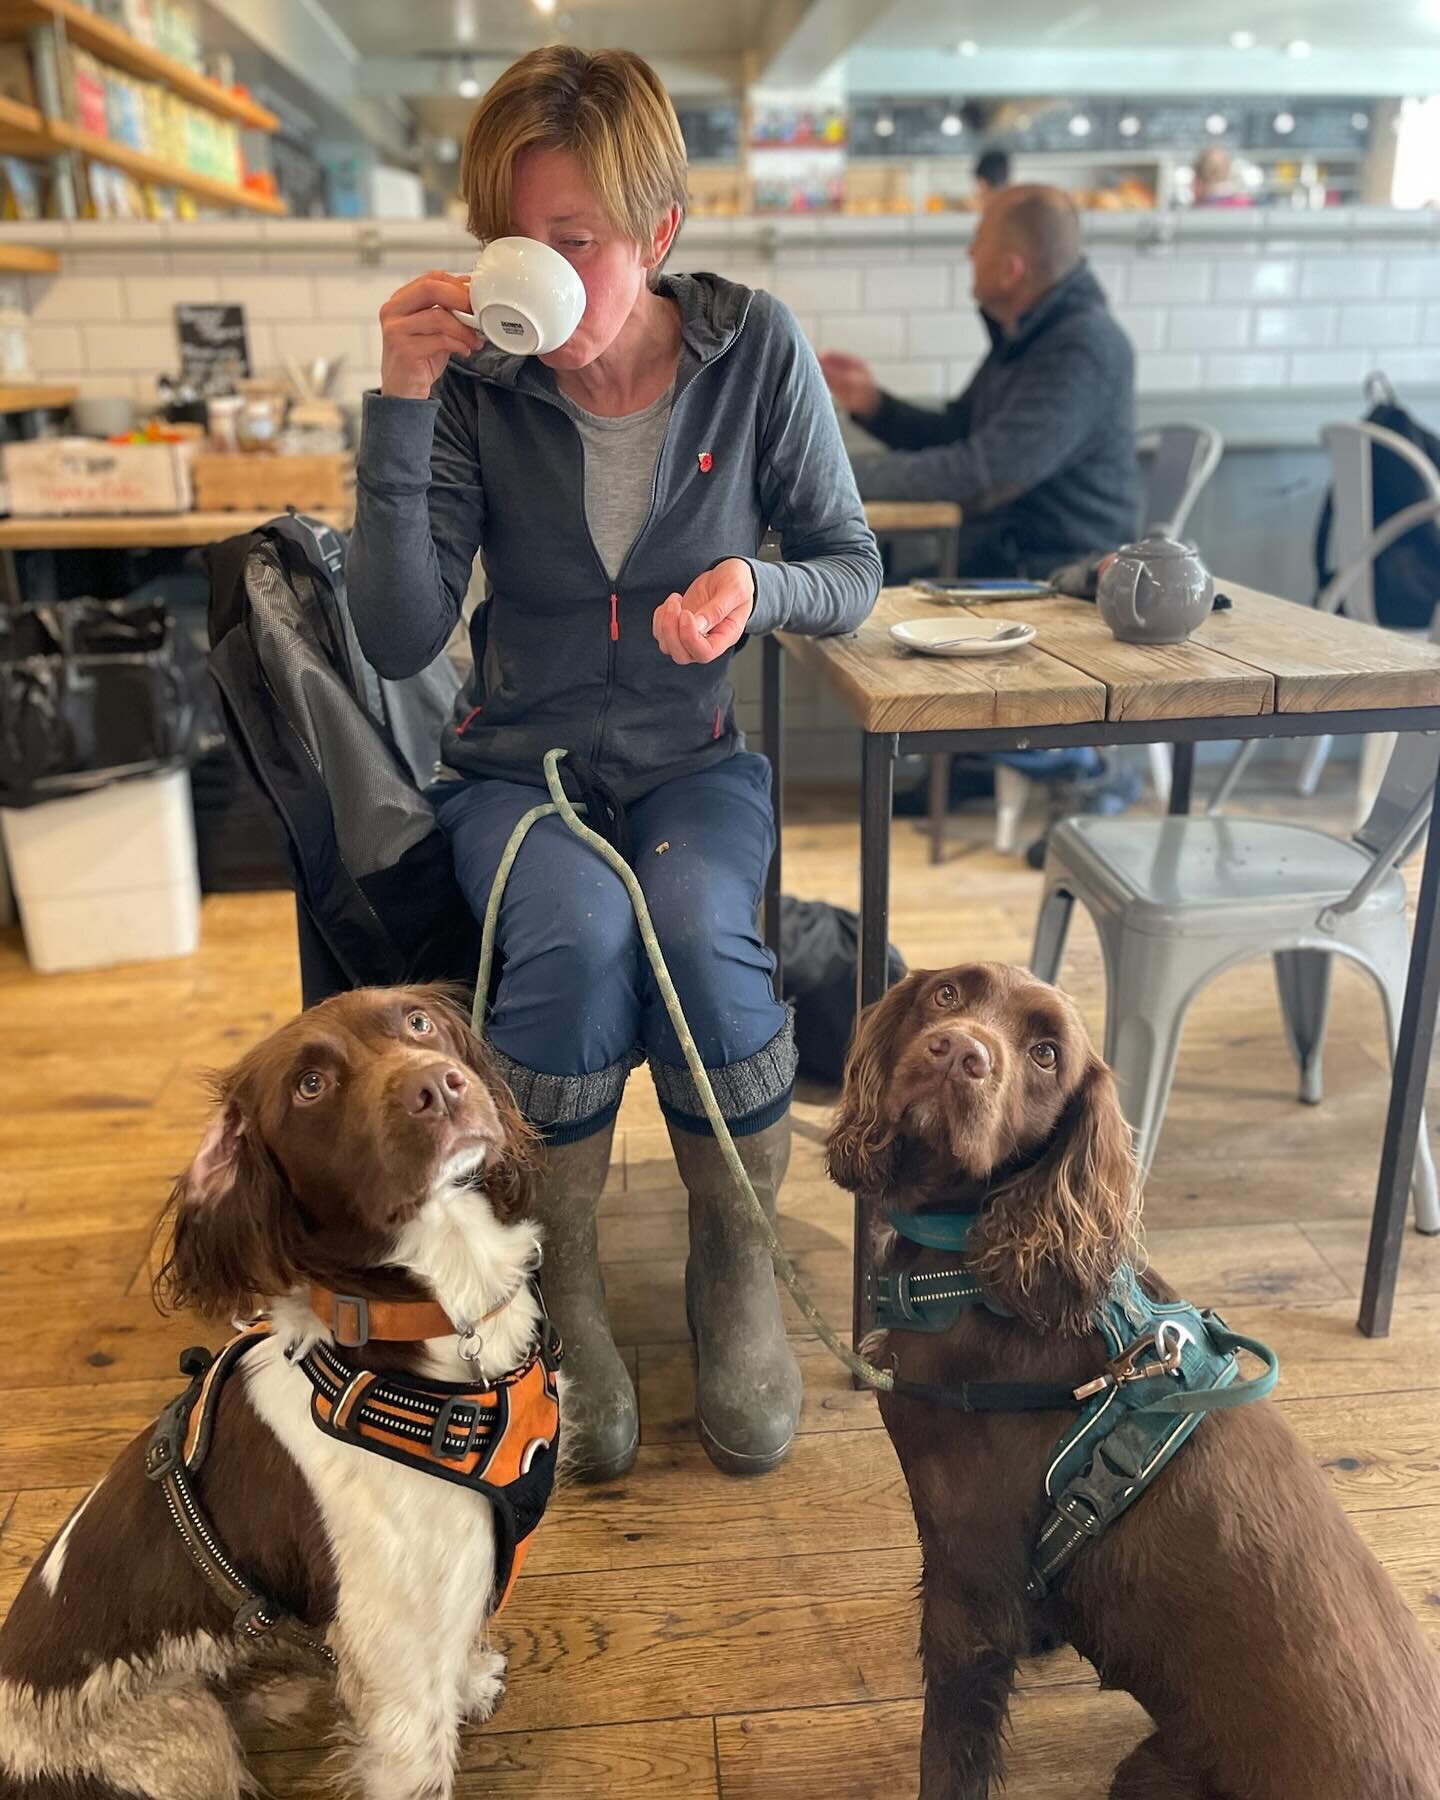 One of our lovely clients, enjoying a serene morning at our bakery with her two adorable companions. ☕🐶🐶

#BakeryMoments #CoffeeWithFriends #bakeryonthewater #cotswoldslife #bourtononthewater #cotswoldsbakery #discovercotswolds #bakeryelove #britis